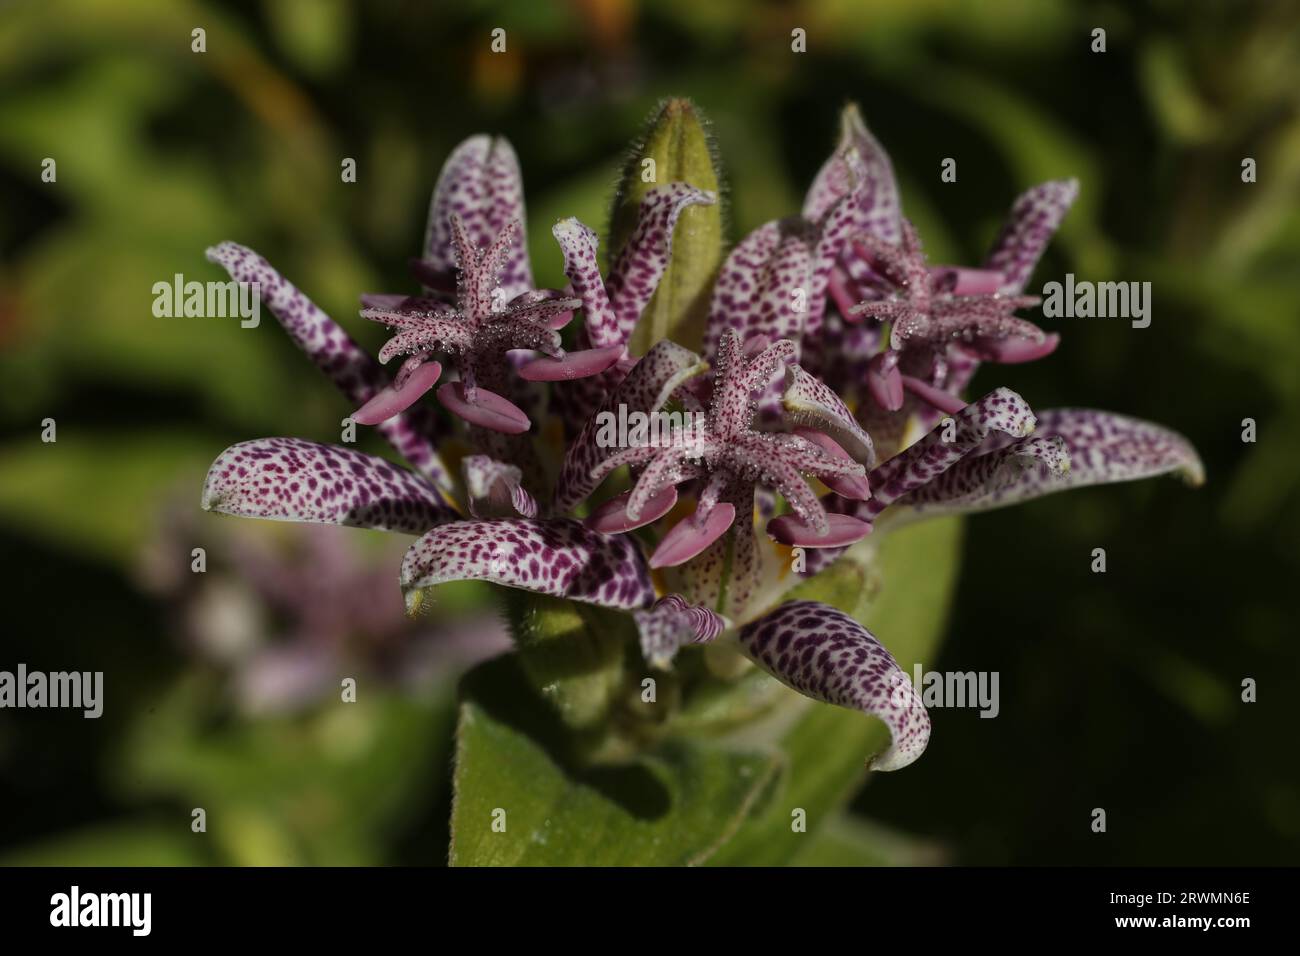 a close up of Tricyrtis hirta, the toad lily or hairy toad lily covered in drops of water Stock Photo